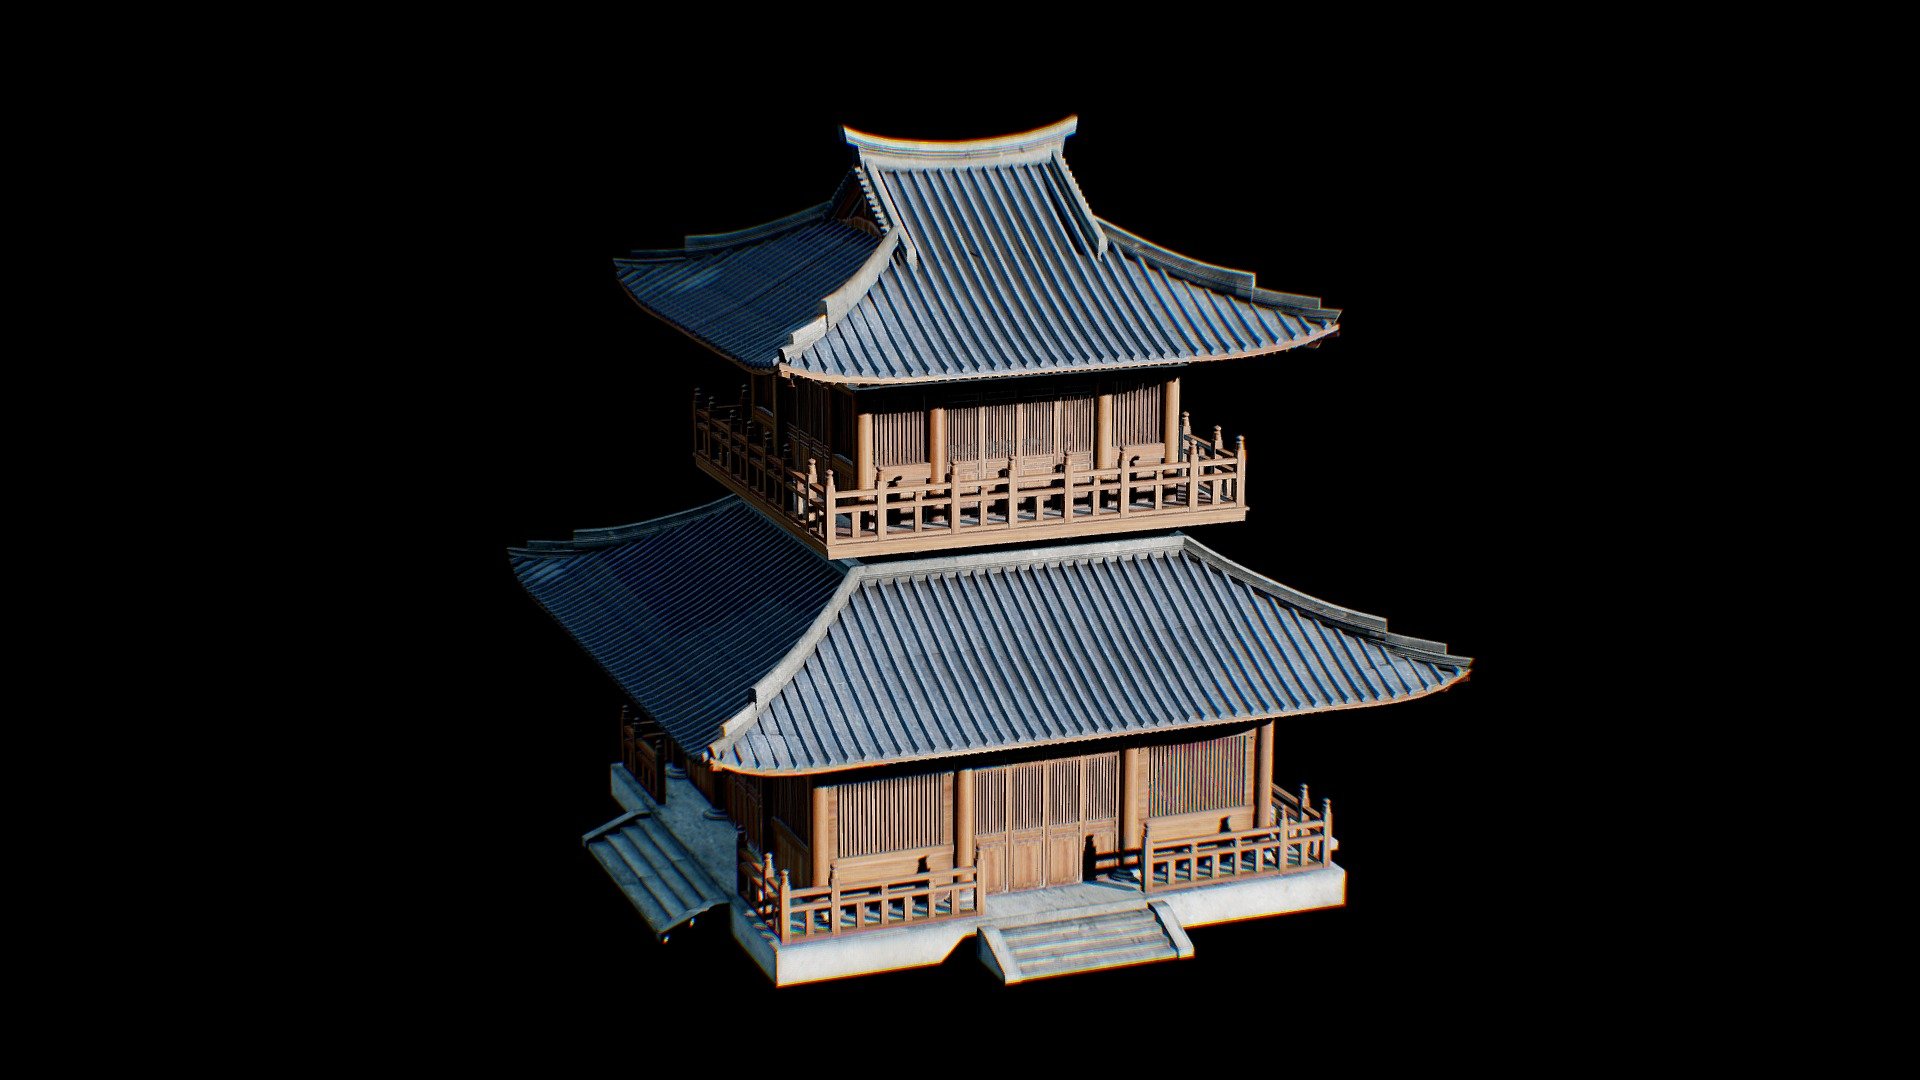 Free download：www.freepoly.org

If you like,Buy me a coffee maybe? https://www.buymeacoffee.com/riveryang - Chinese Temple-Freepoly.org - Download Free 3D model by Freepoly.org (@blackrray) 3d model